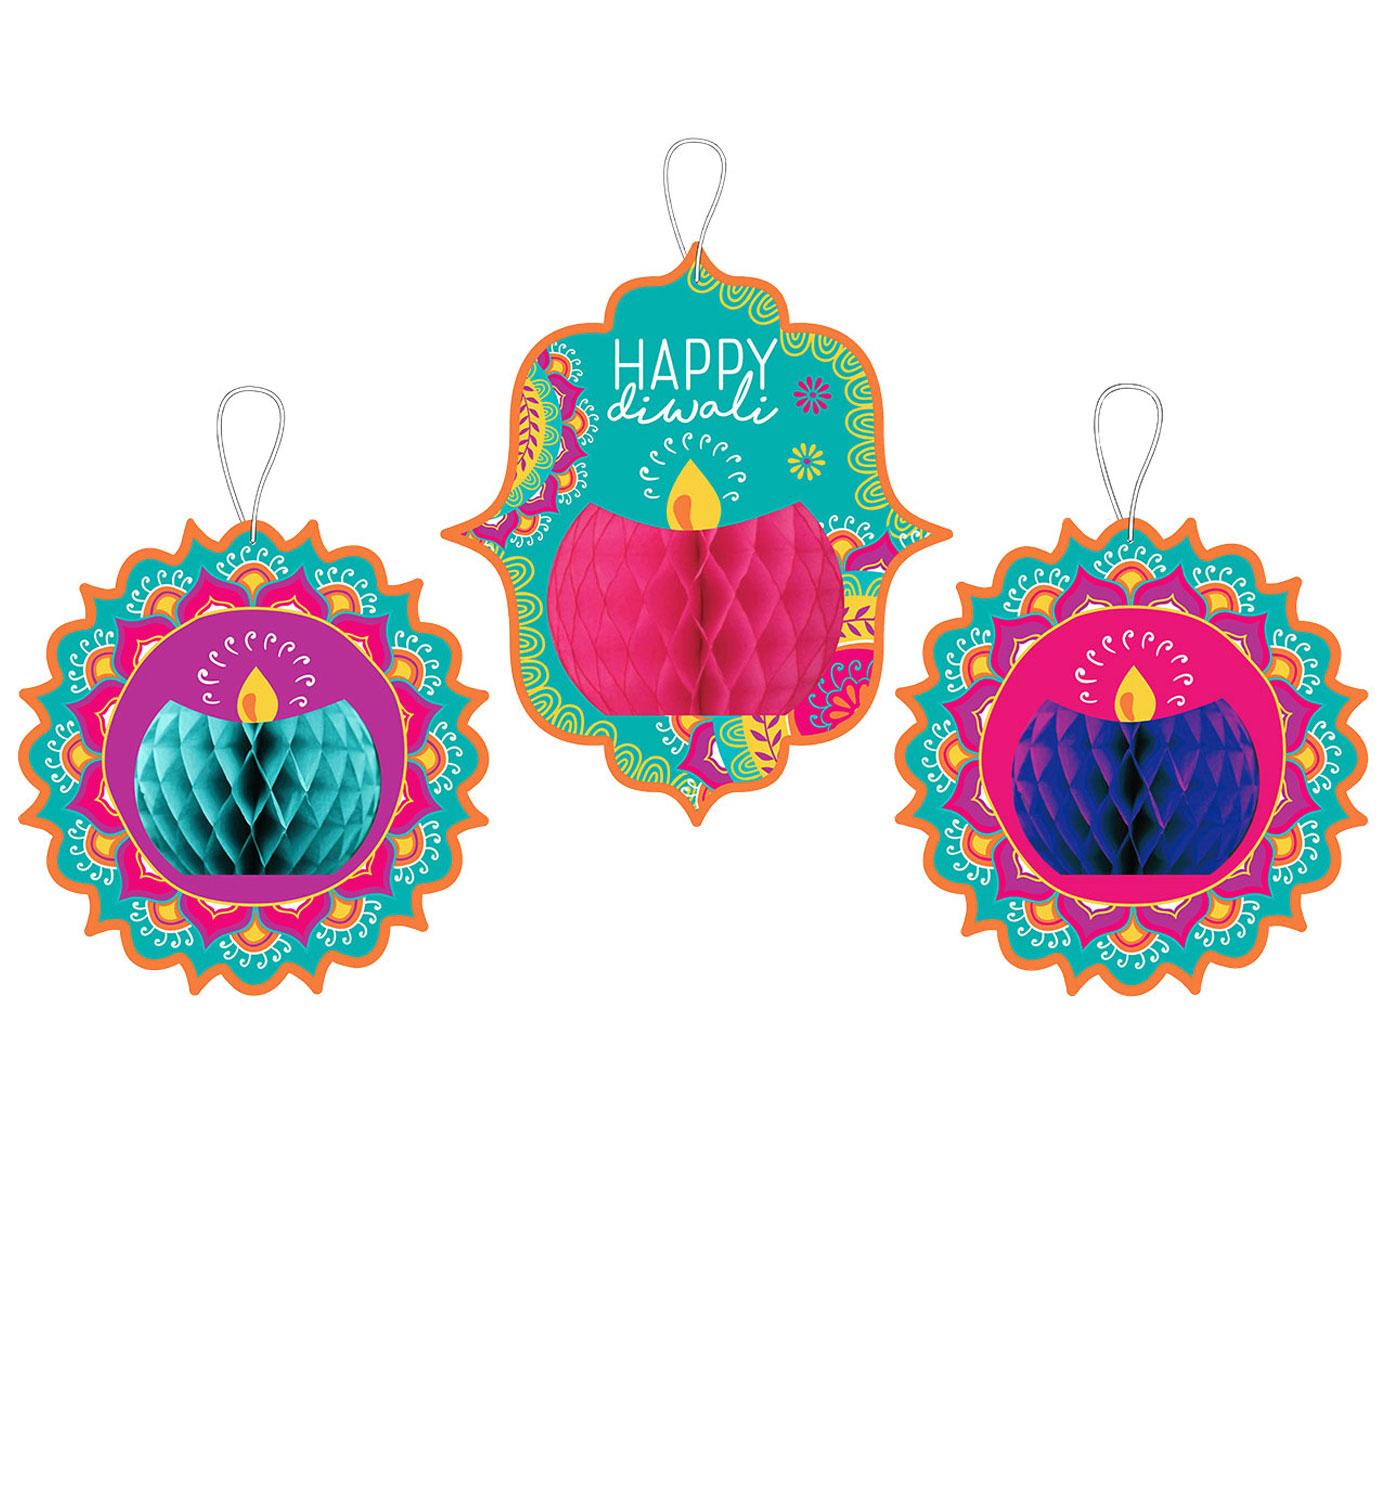 Diwali Honeycomb Hanging Decorations 3pcs by Amscan 290136 available here at Karnival Costumes online party shop